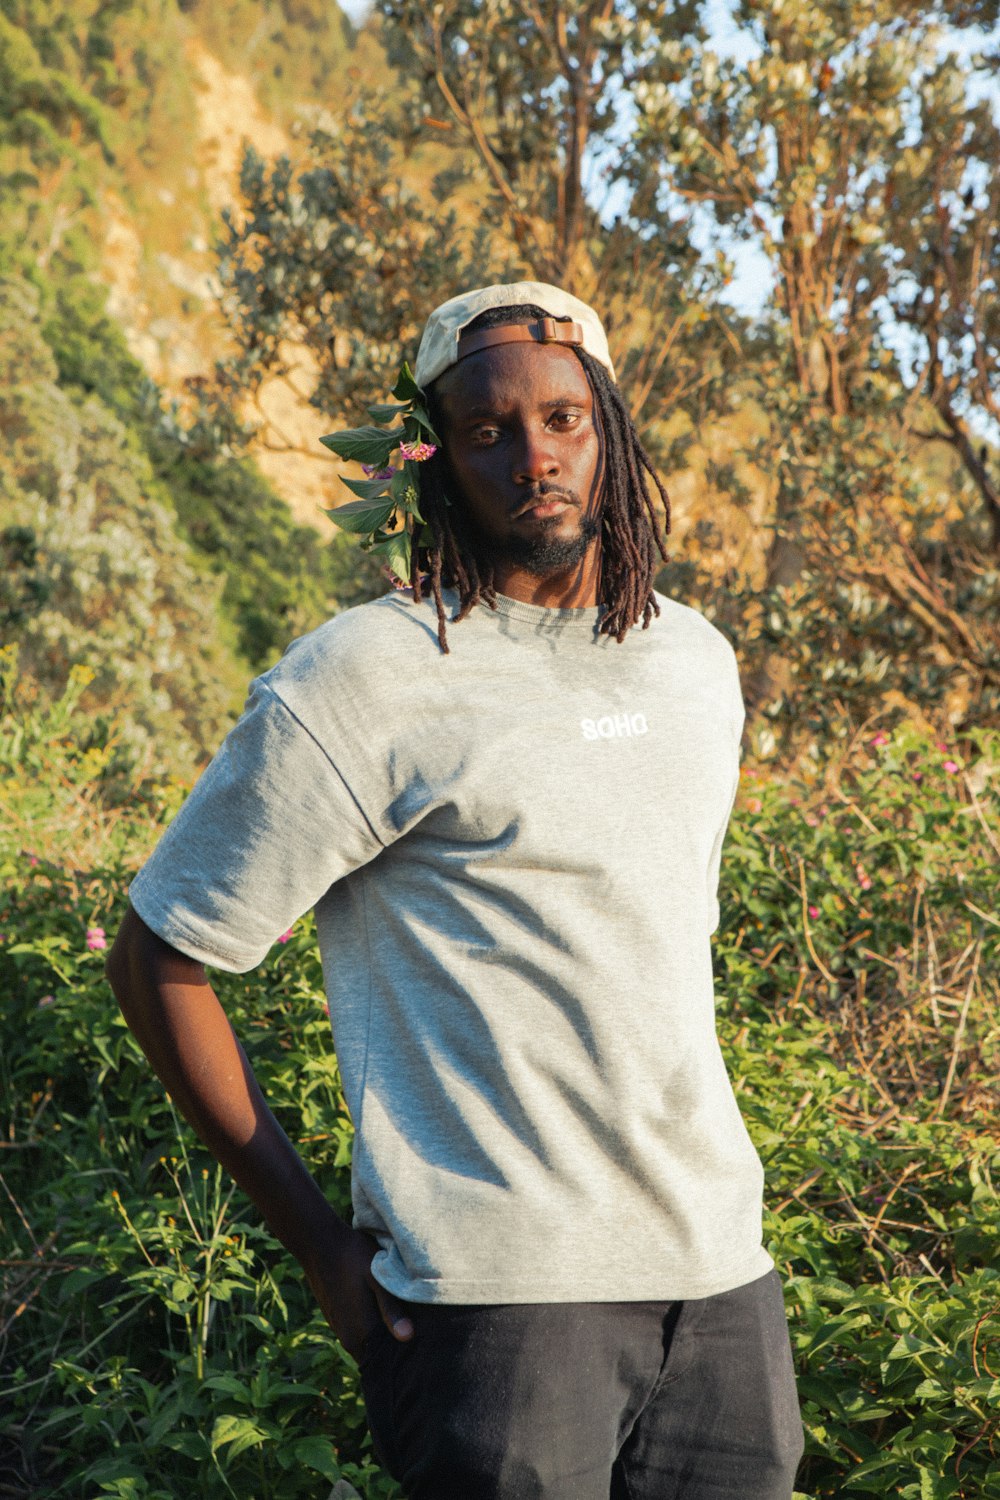 a man with dreadlocks standing in a field